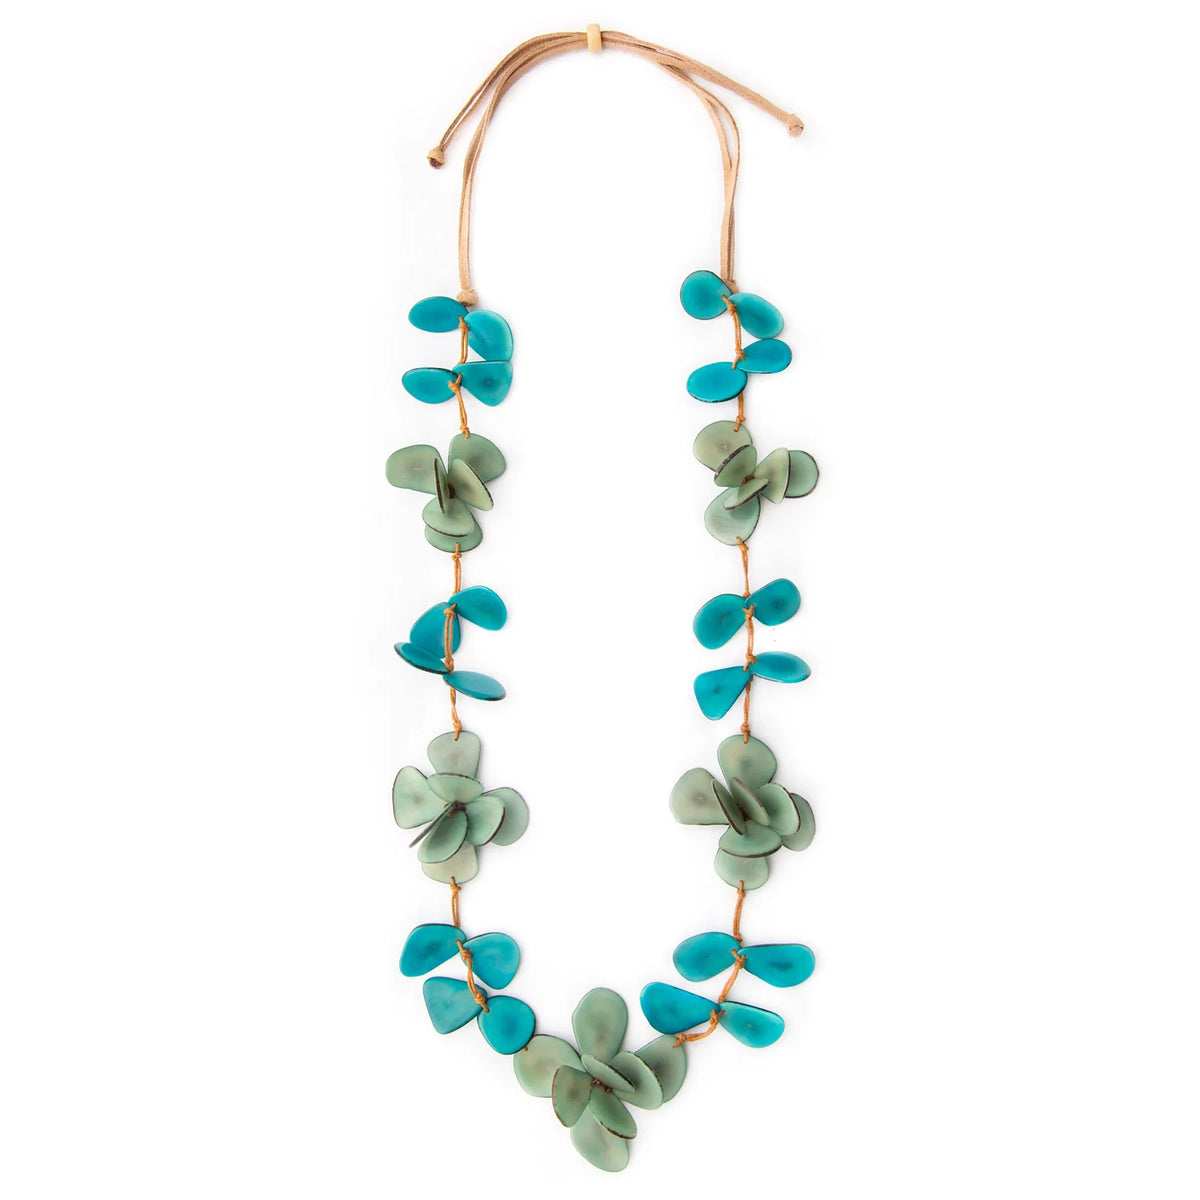 Tagua Rosie Necklace